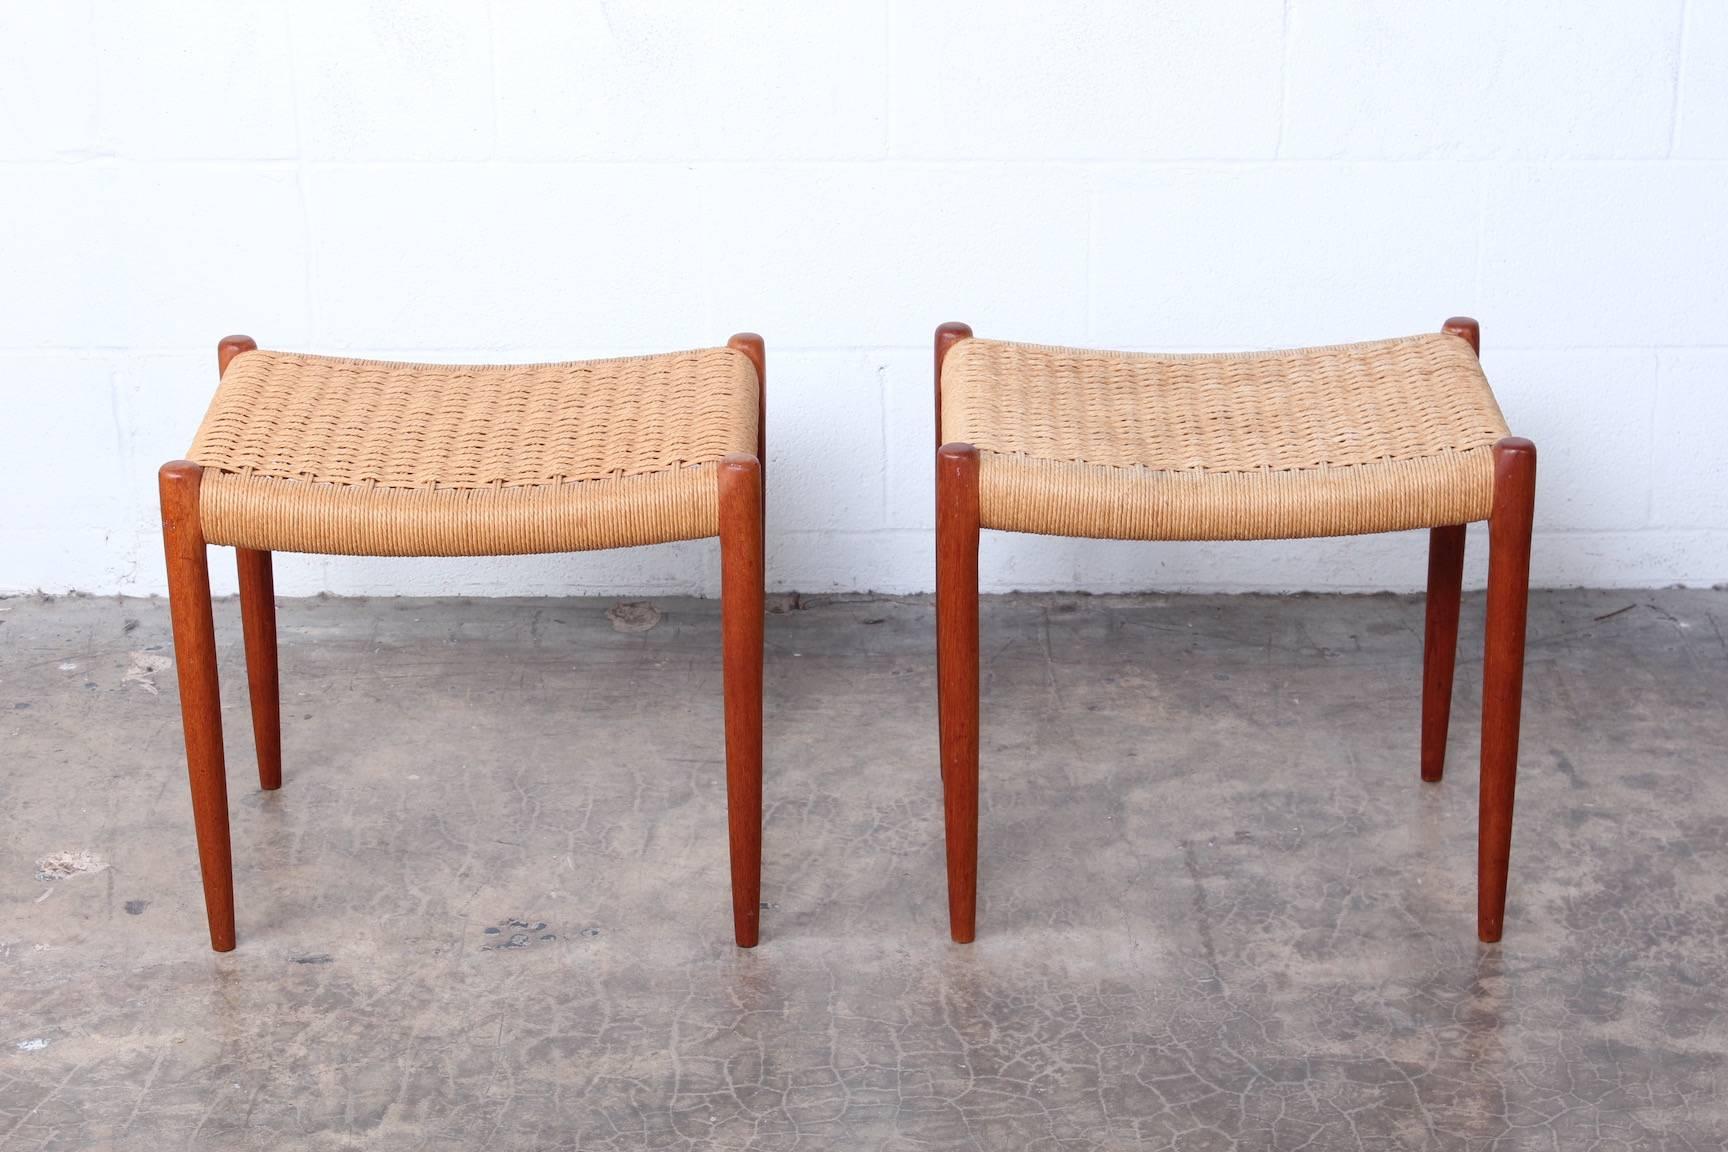 A pair of teak stools with paper cord seats. Designed by Niels O. Møller, manufactured by J.L. Møllers Møbelfabrik.